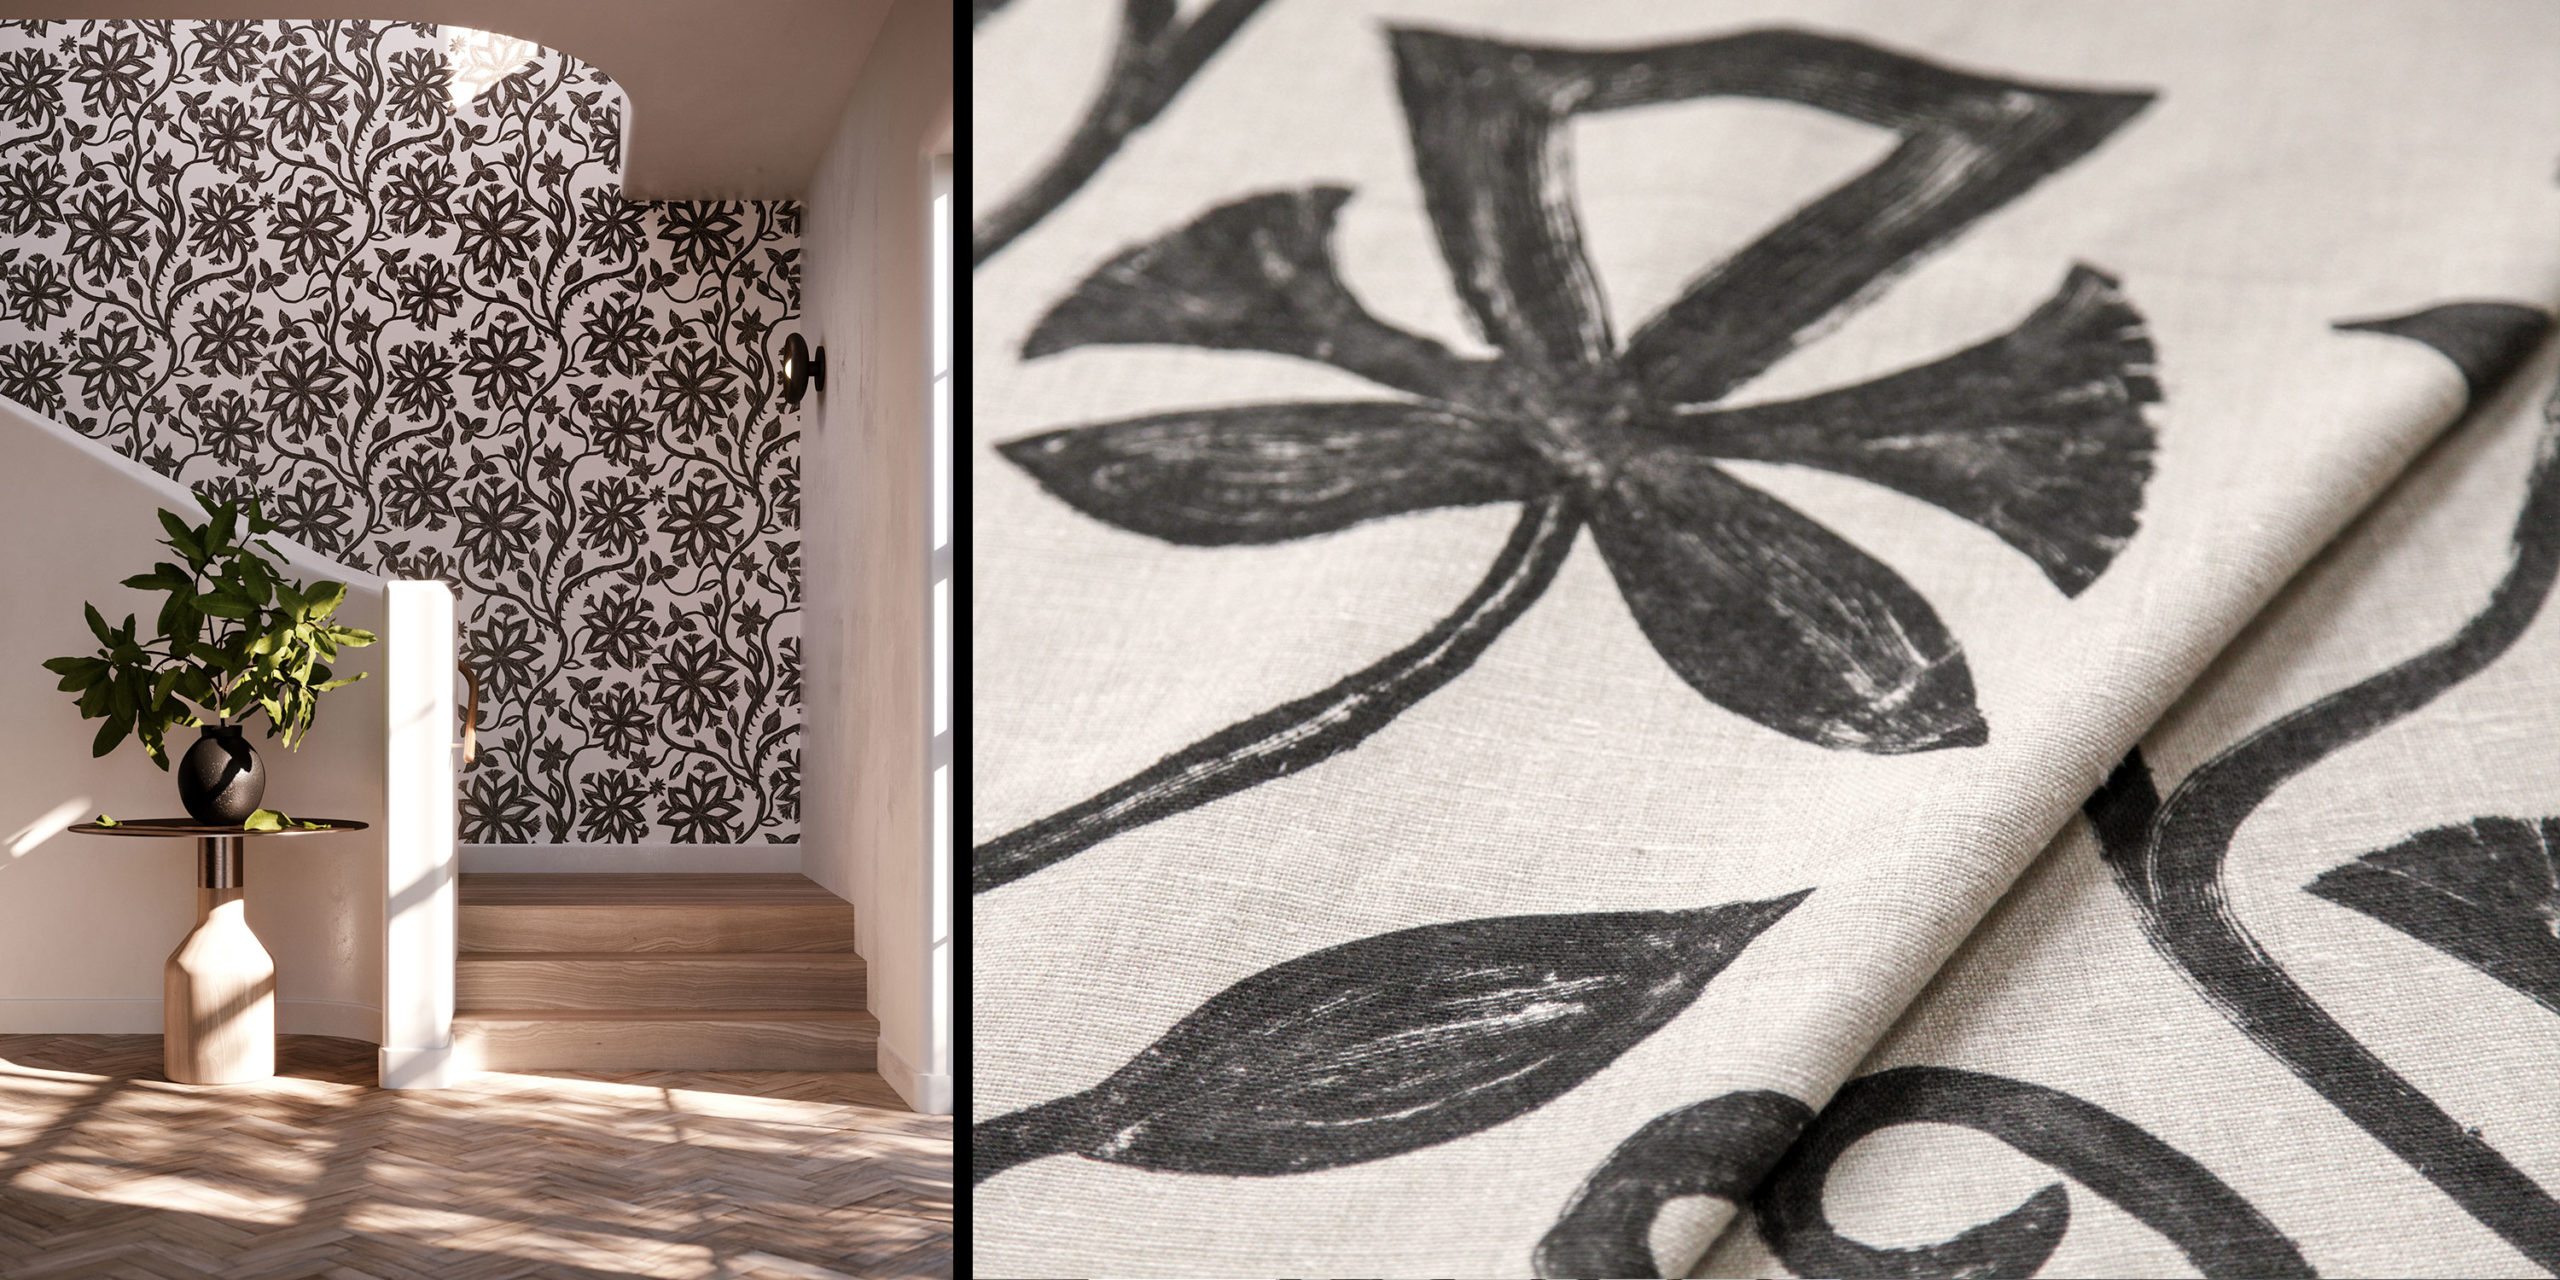 khovar wallpaper and linen fabric collection, bold graphic textured prints.